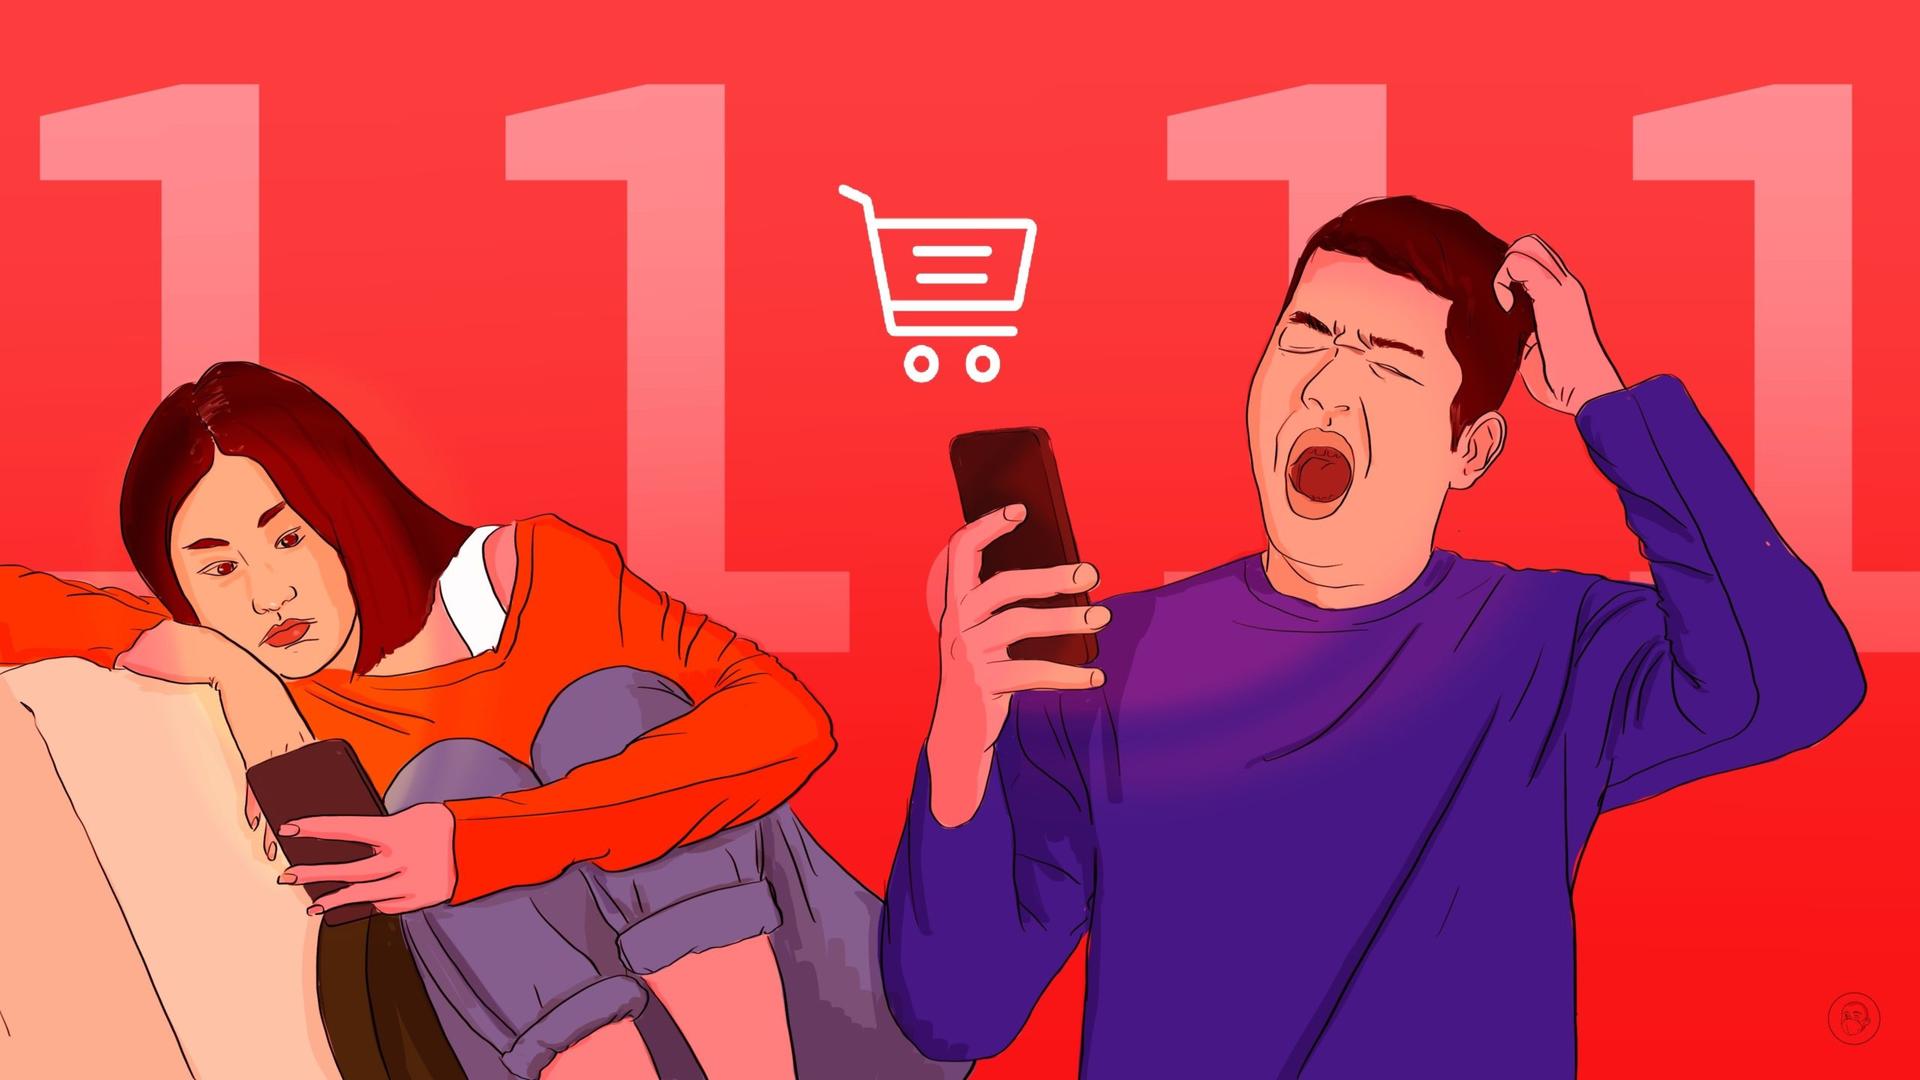 An illustration by Alex Santafe depicting online customers bored of the offers for Singles Day 11